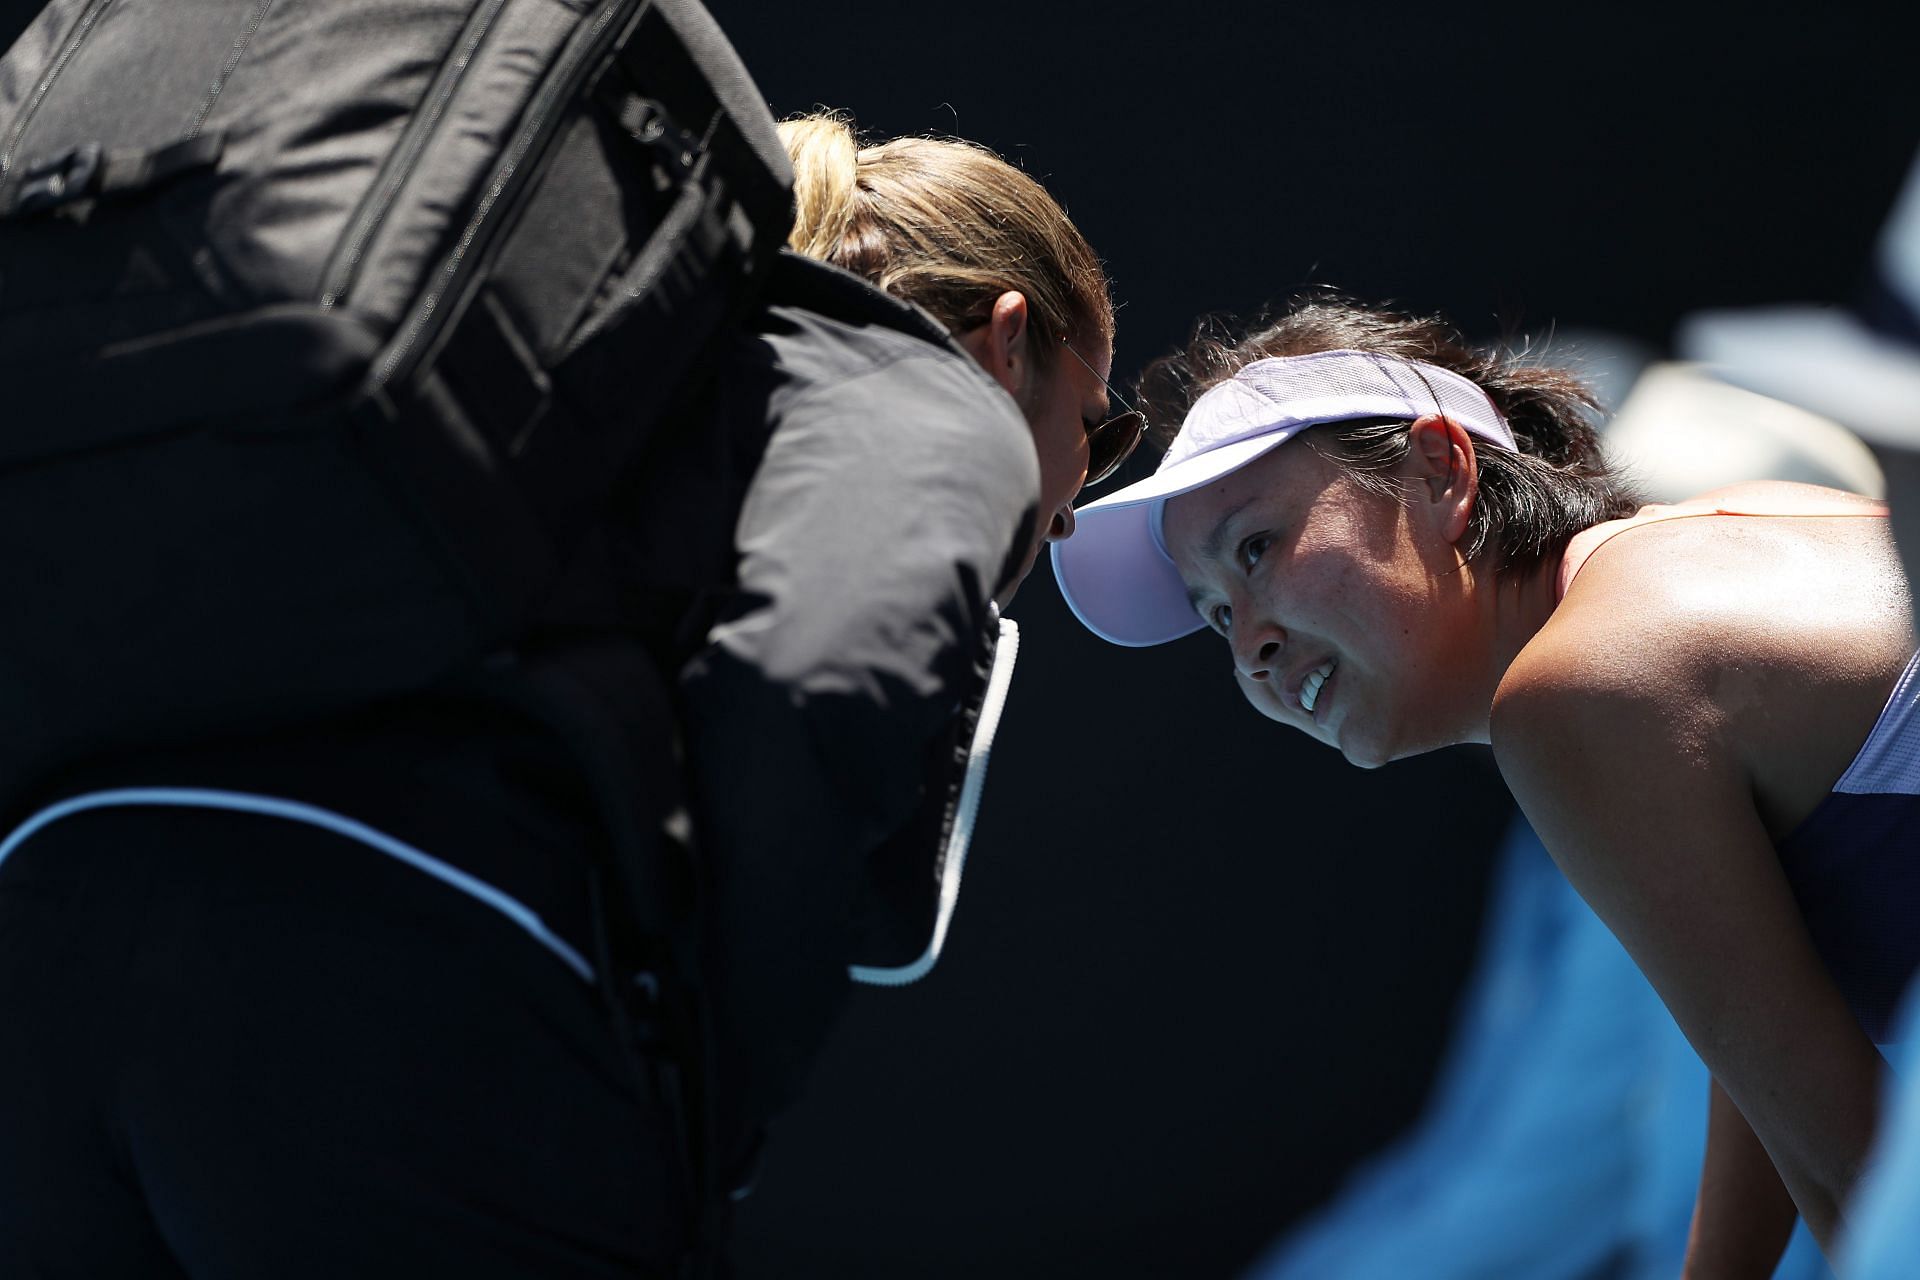 Peng Shuai has not made any public apperance since coming forawrd with her allegations.